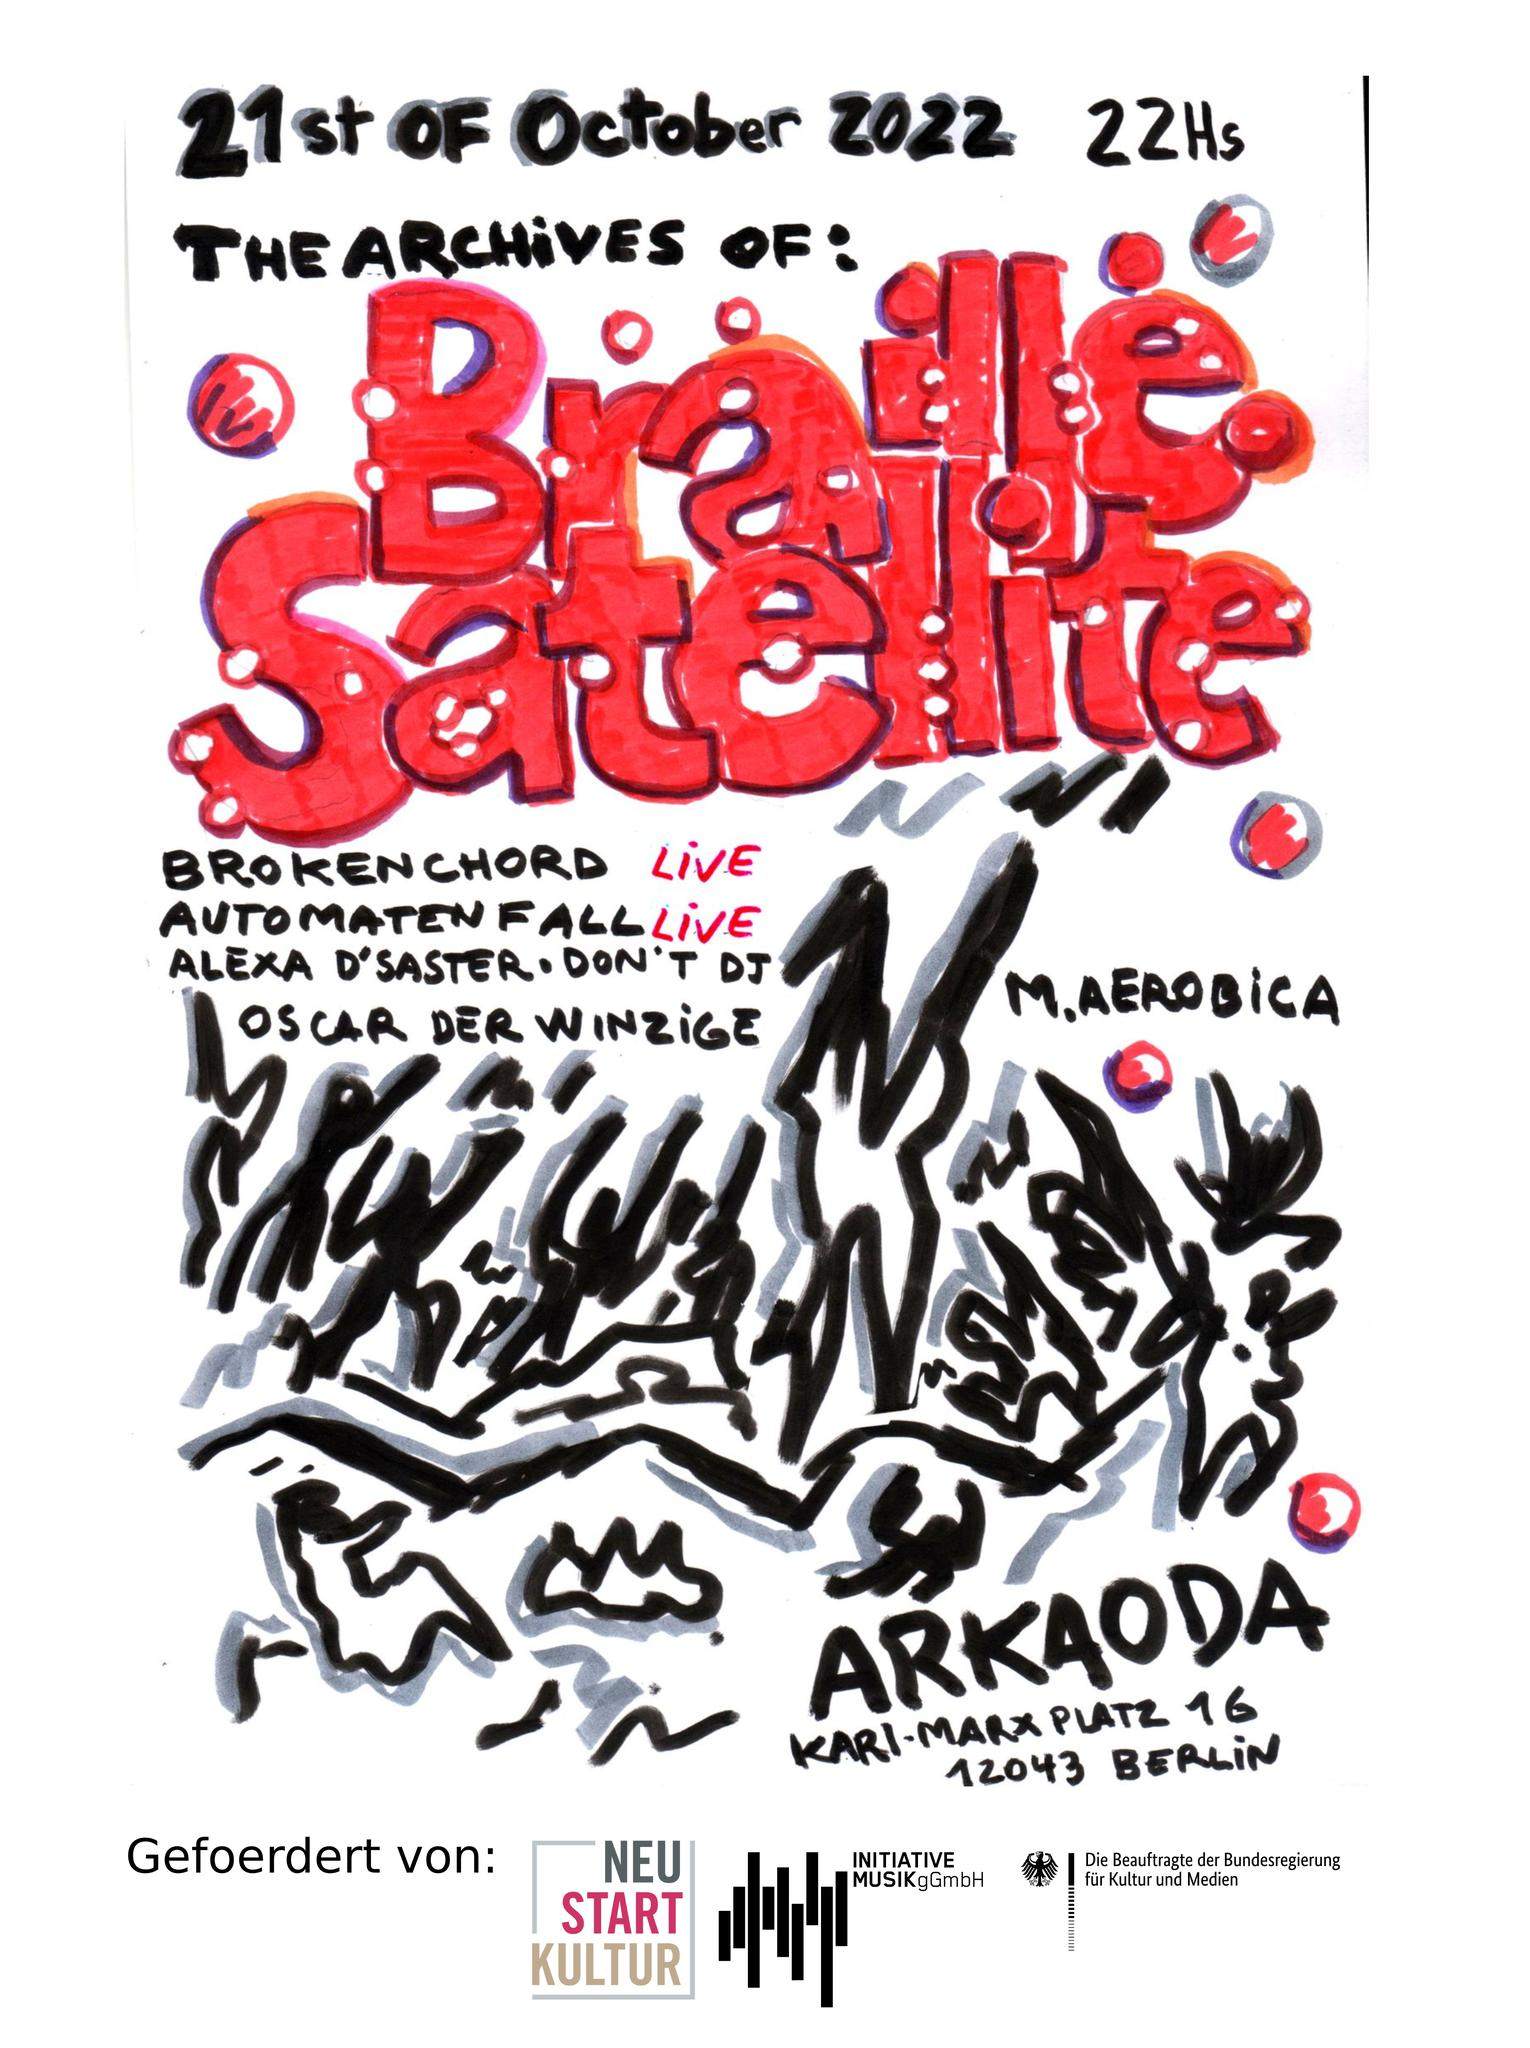 The Archives of Braille Satellite x arkaoda - フライヤー表